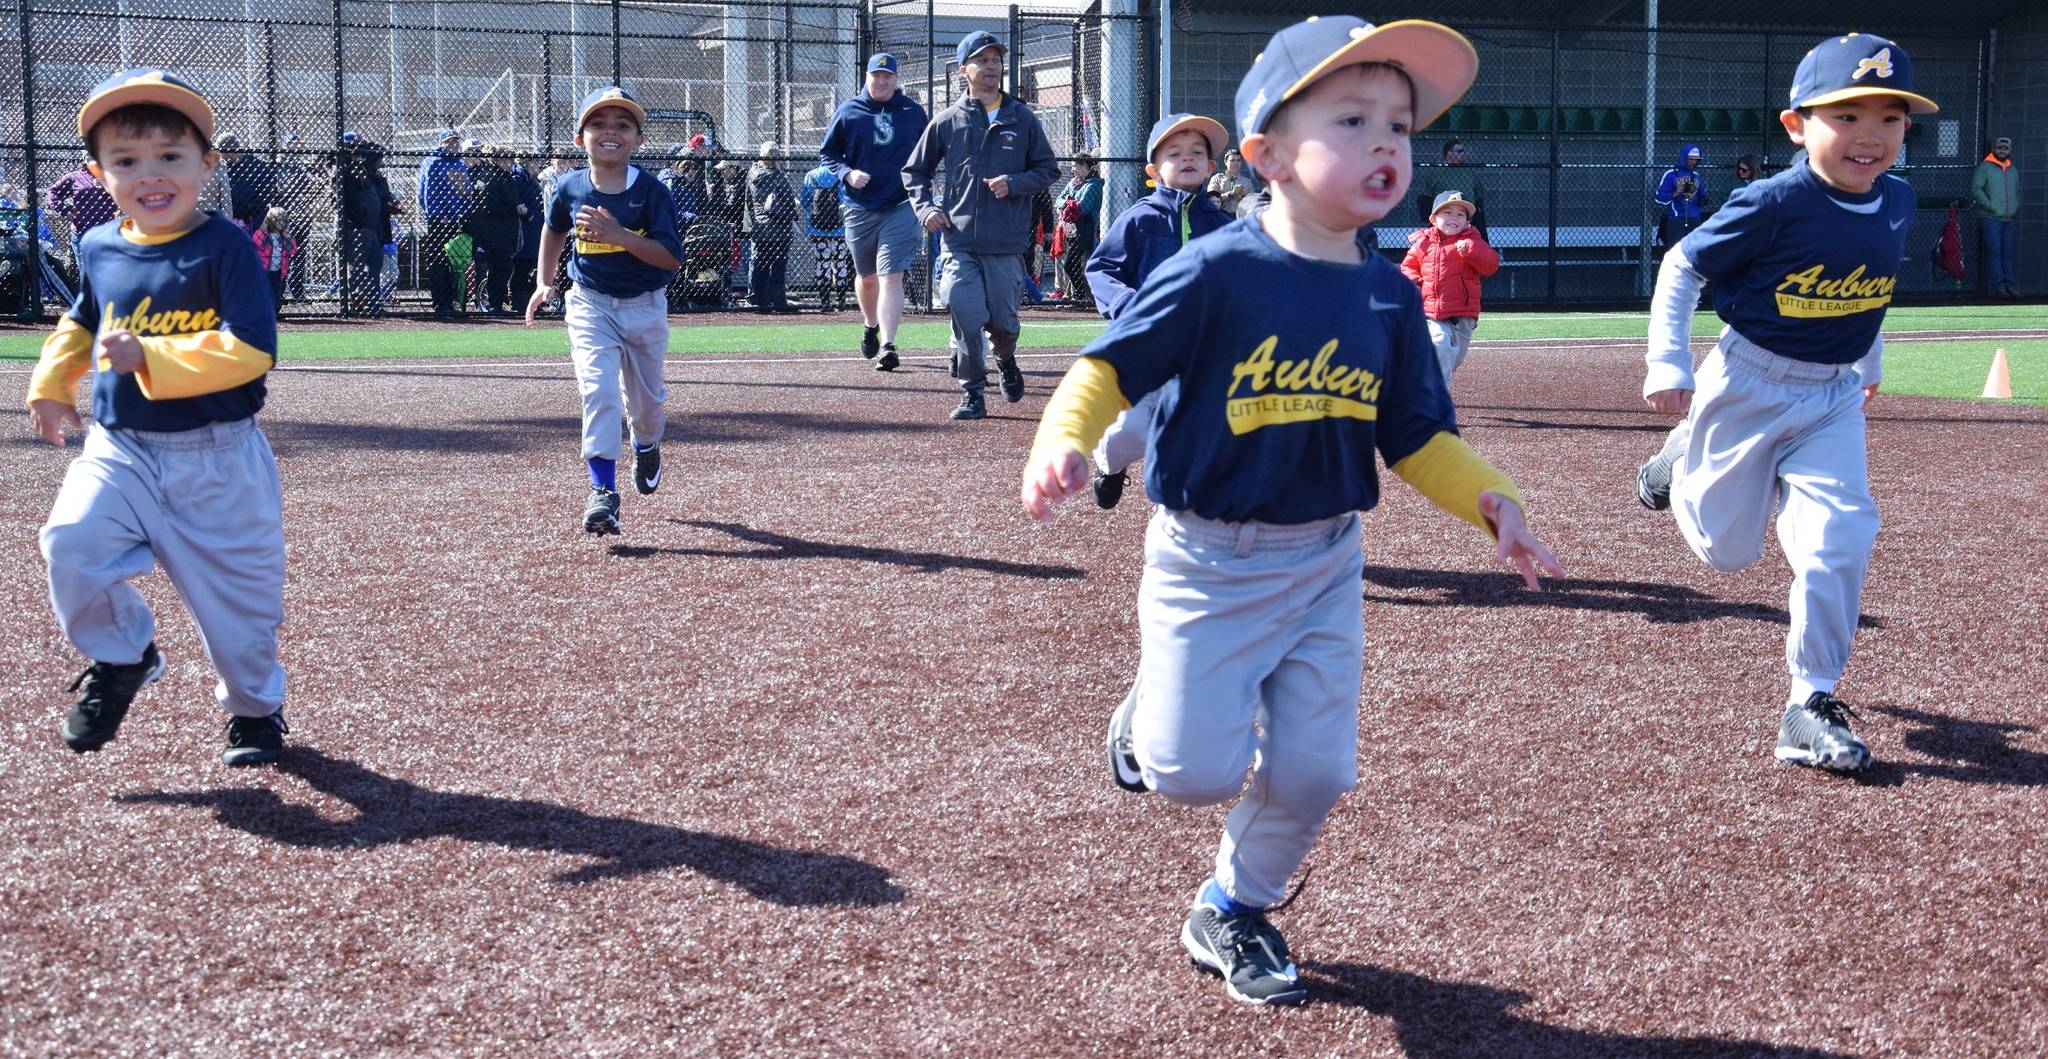 Little League players run onto the field for the opening day ceremony at the Auburn High School Ballfields last Saturday. RACHEL CIAMPI, Auburn Reporter